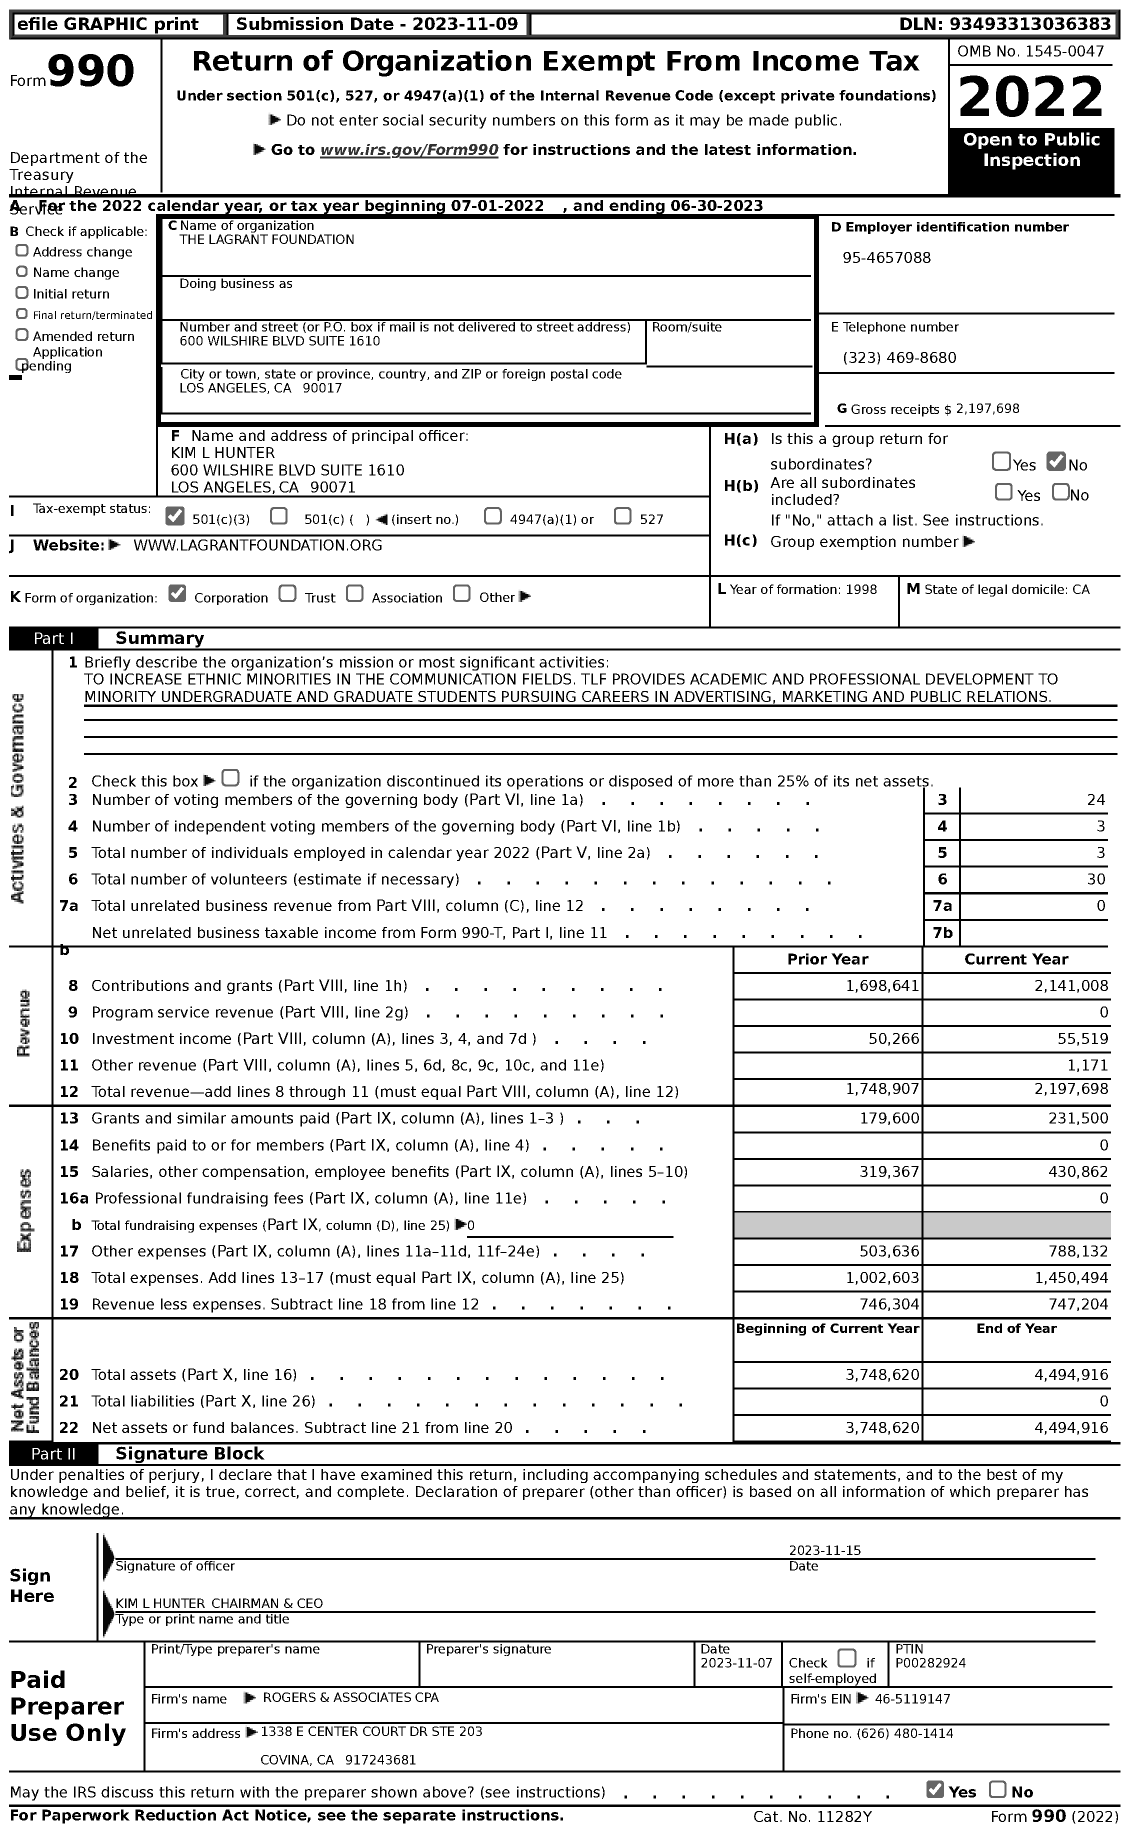 Image of first page of 2022 Form 990 for The Lagrant Foundation